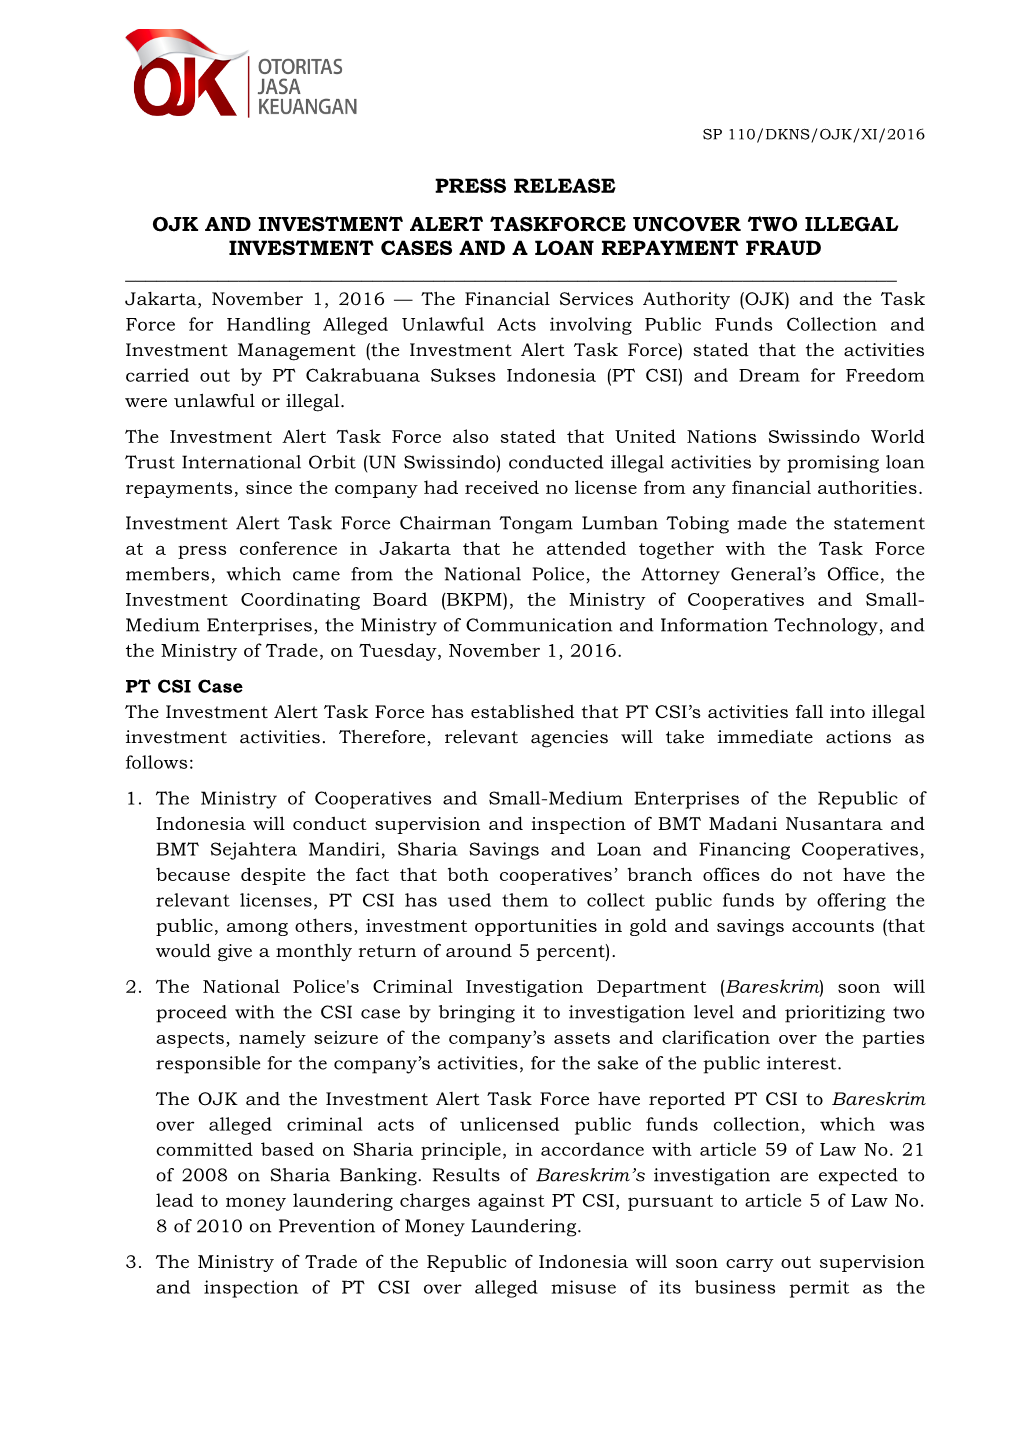 Press Release Ojk and Investment Alert Taskforce Uncover Two Illegal